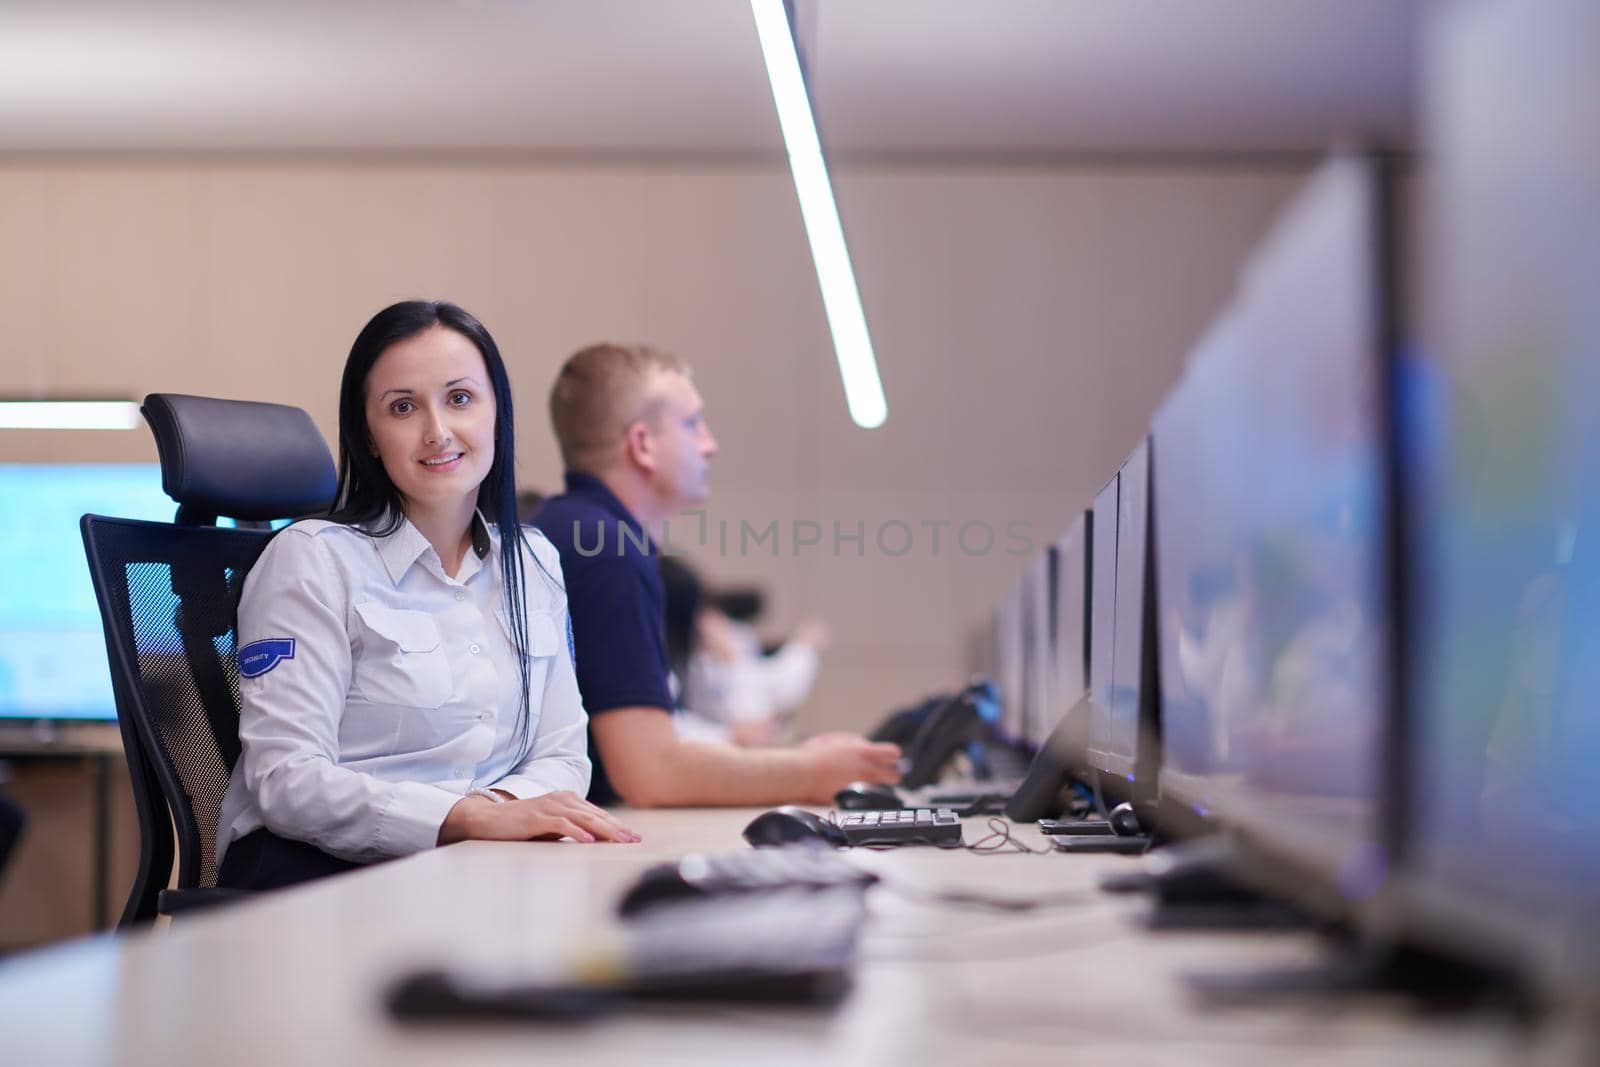 Female security operator working in a data system control room offices Technical Operator Working at  workstation with multiple displays, security guard working on multiple monitors